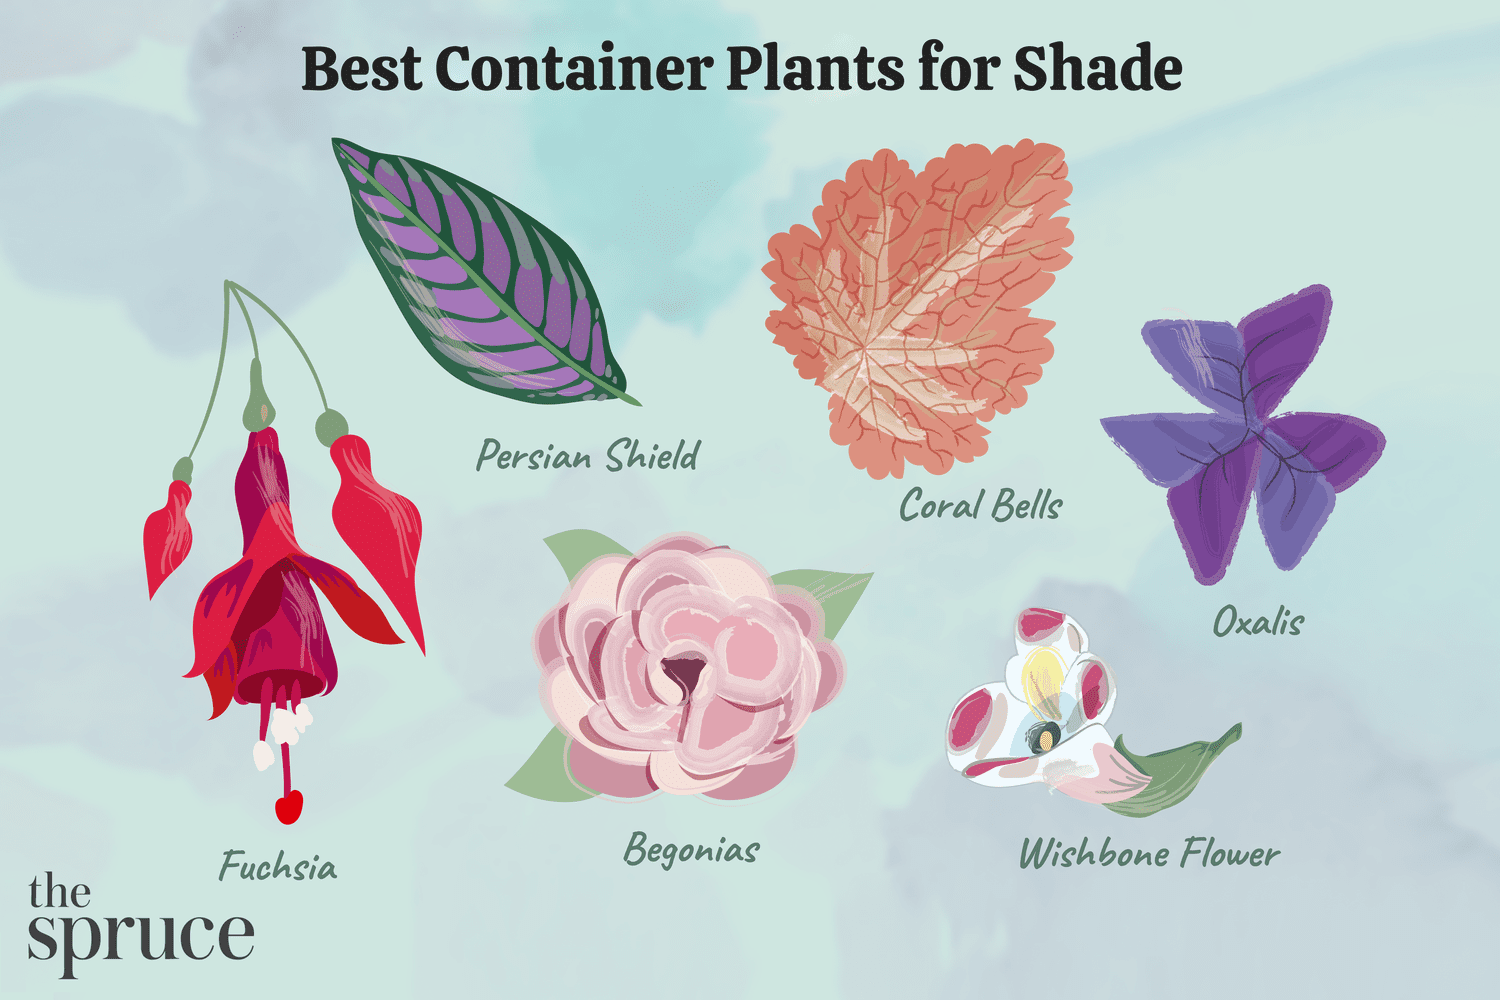 Best Container Plants for Shade